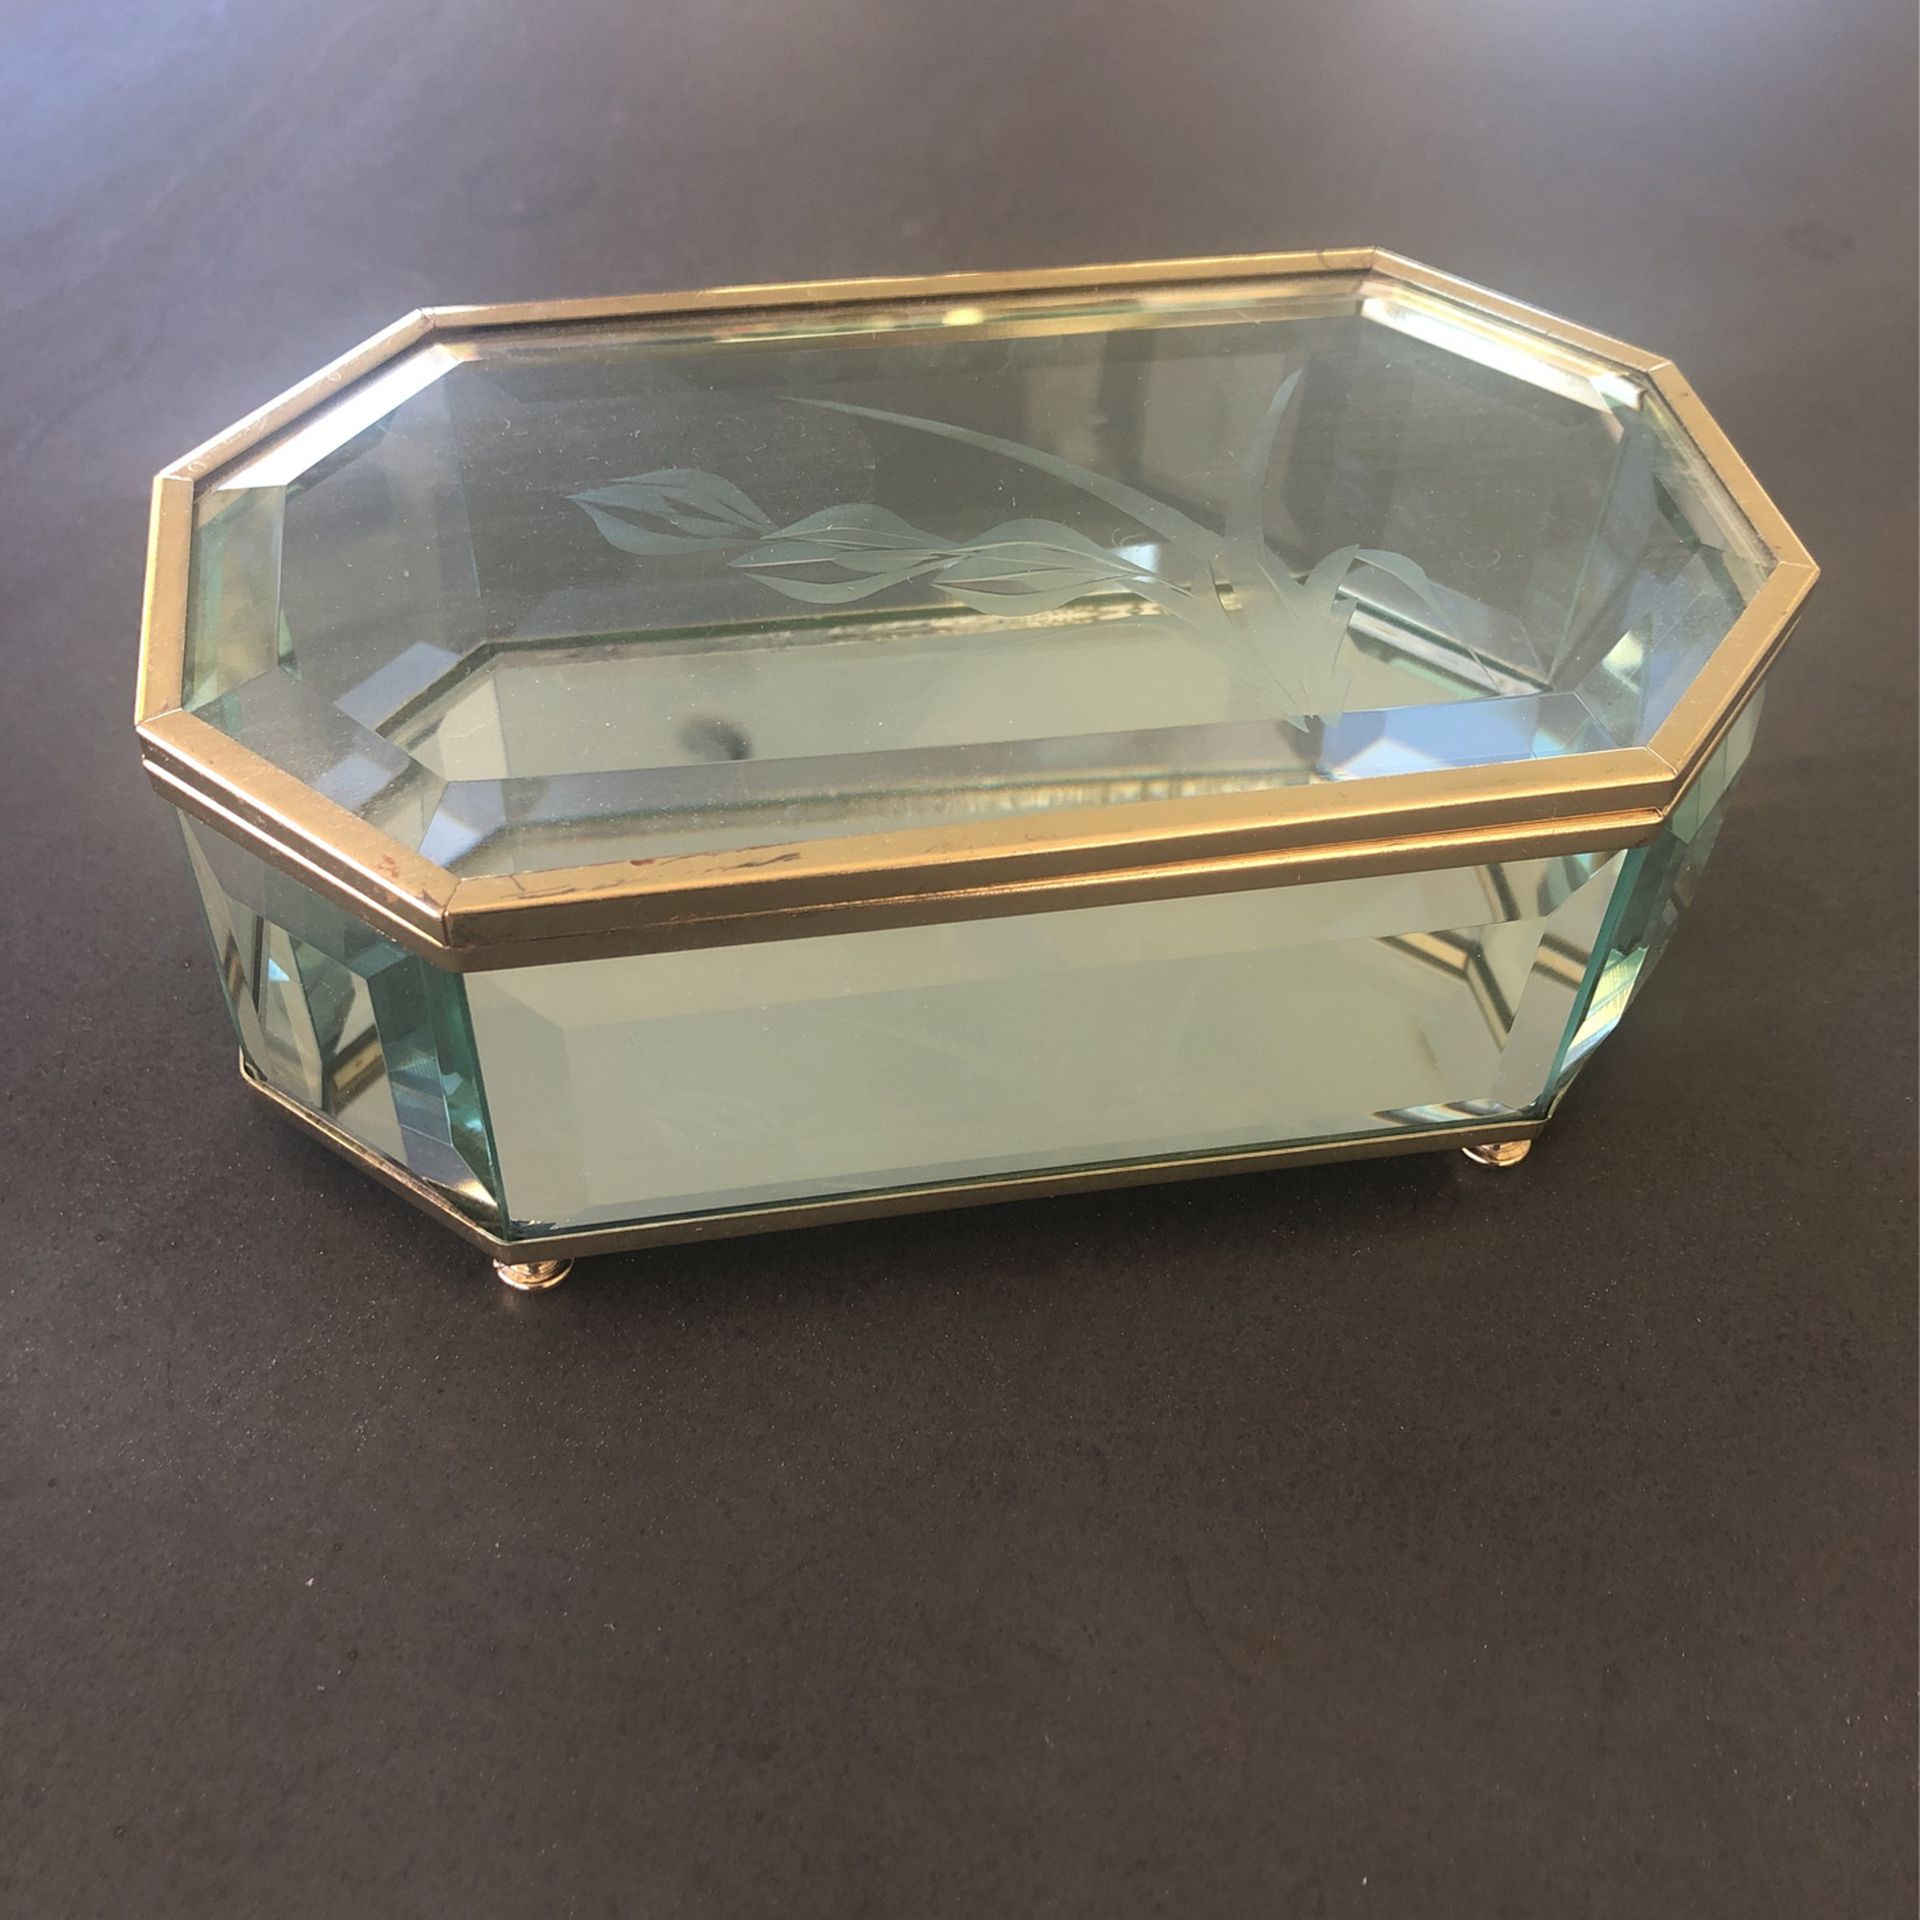 Etched glass Jewelry container